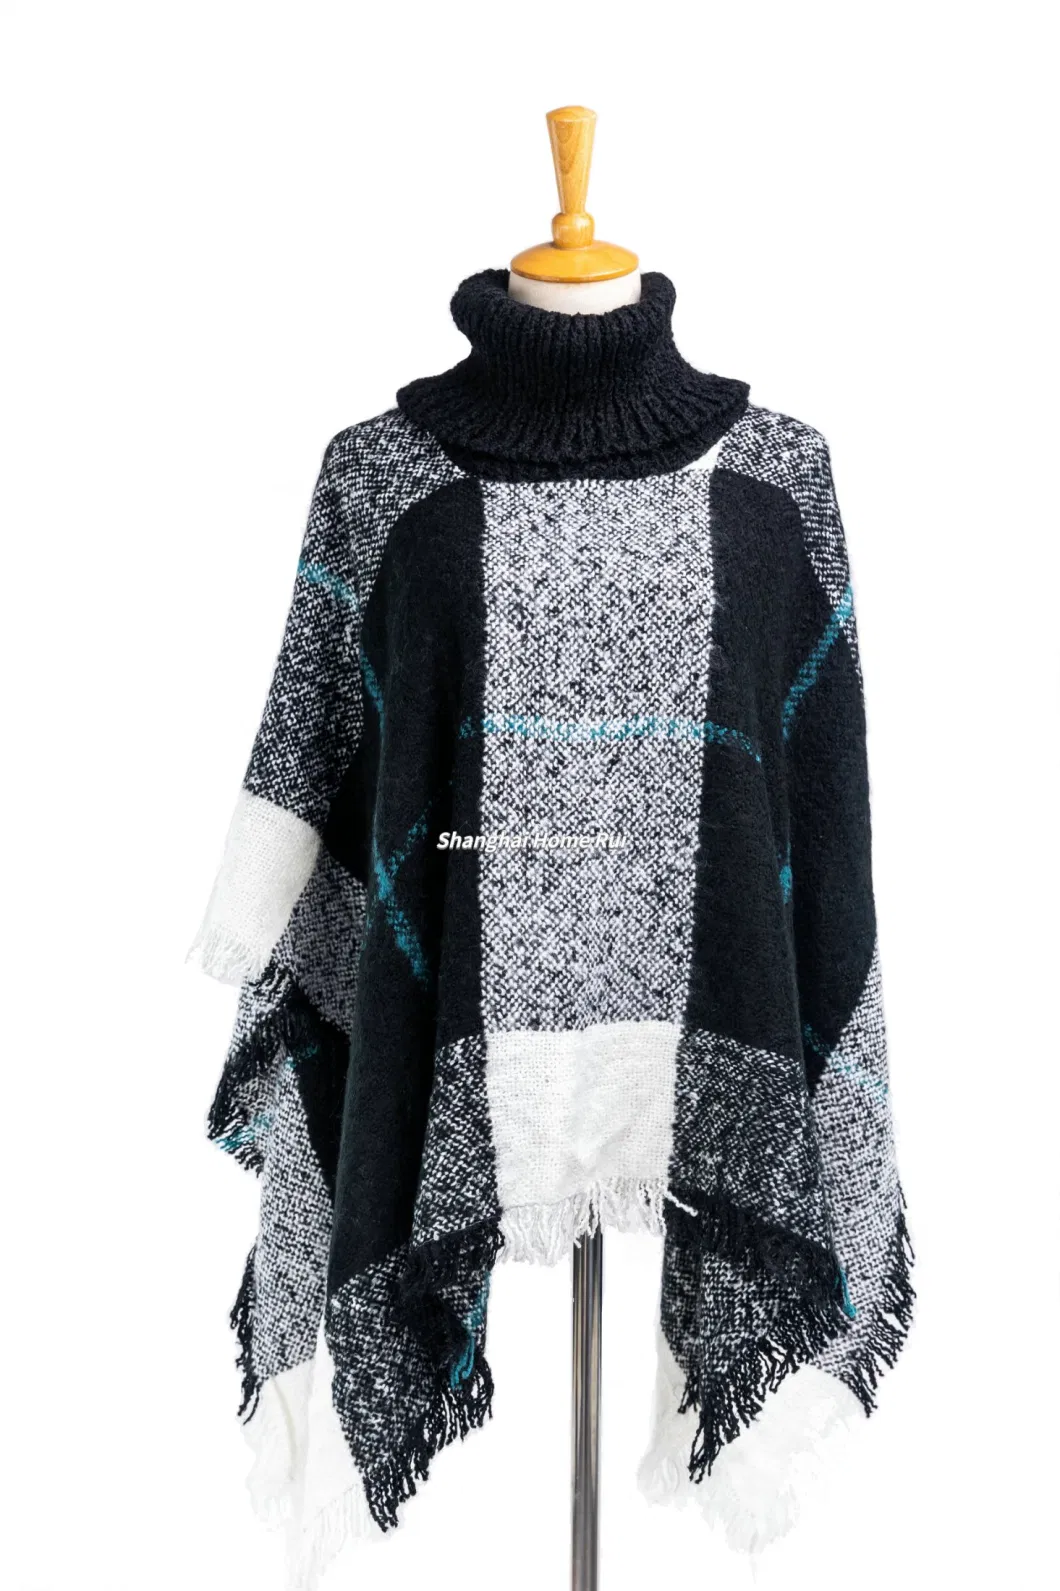 Outfit Fall Winter Couture Lady Woven Plus Batwing Breathable Classic Knitted Mixed Block Tassel Wraps Nova Scottish Plaid Checks Sweater Cape High Neck Cloak